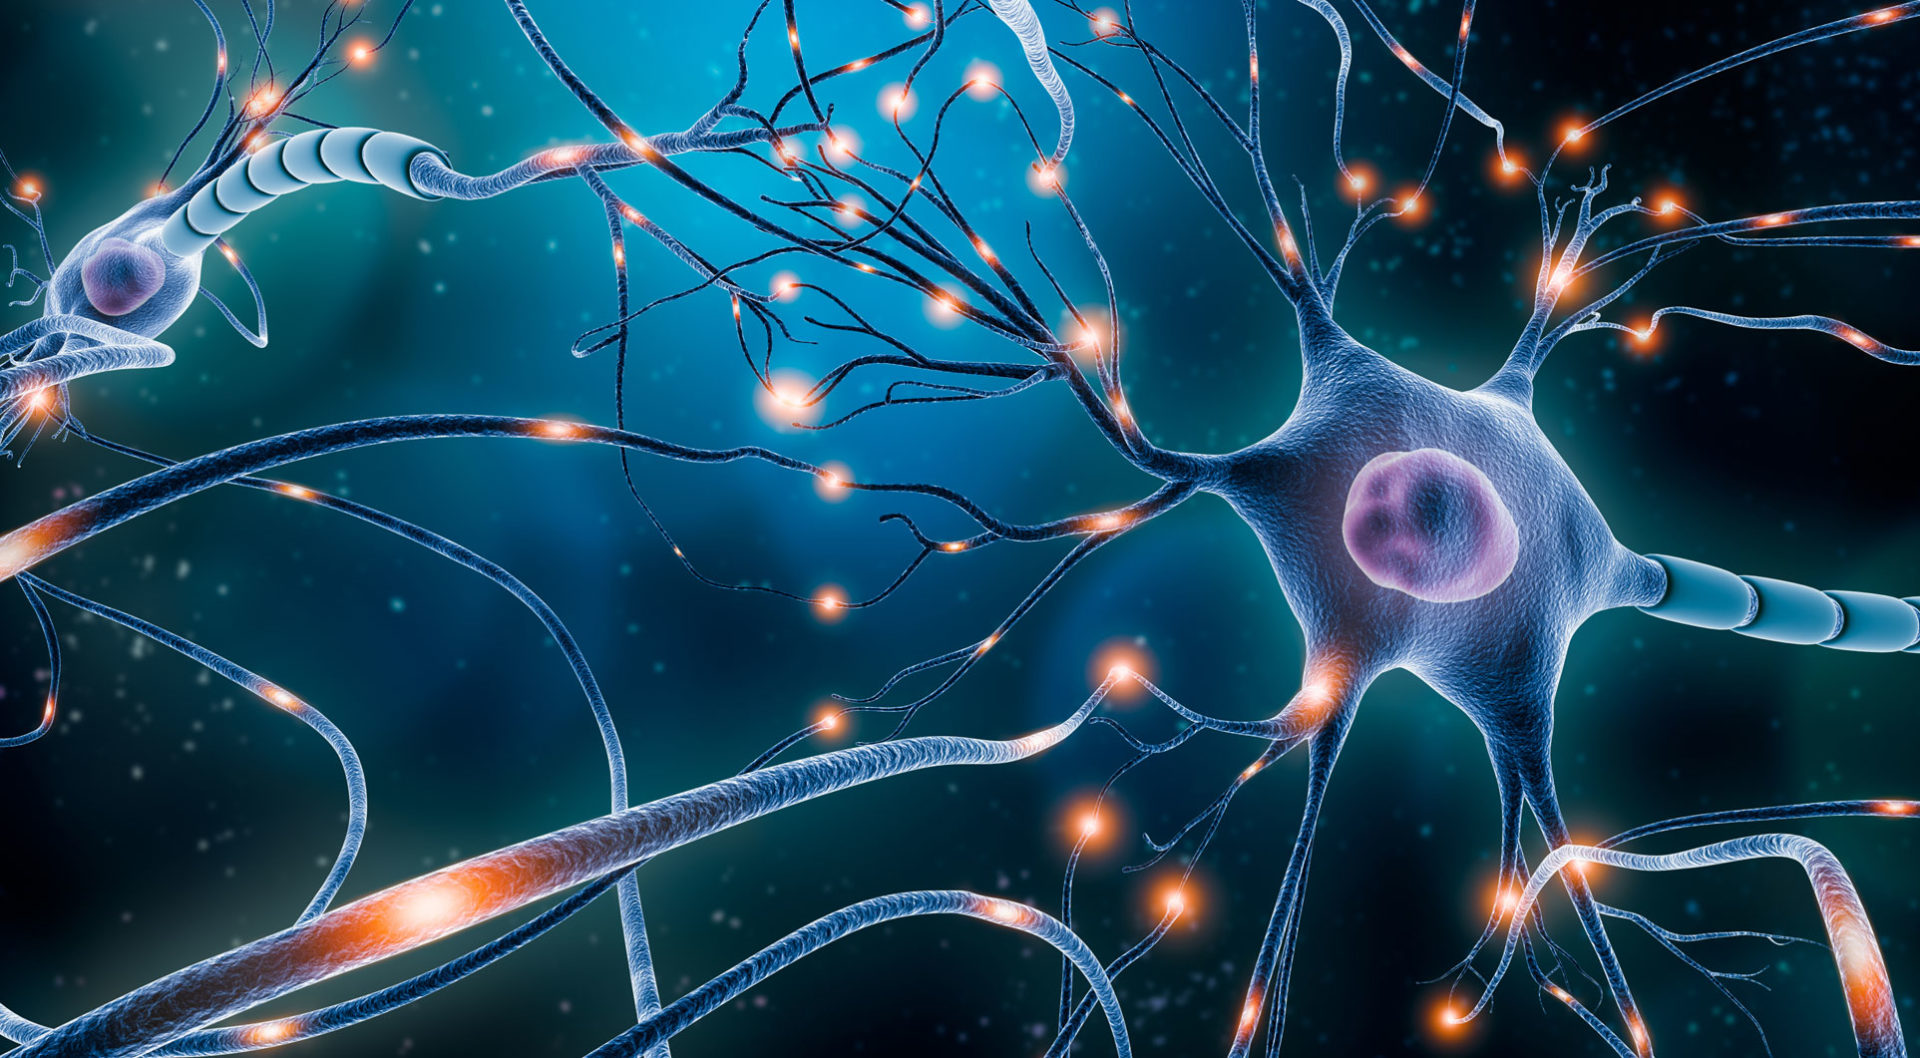 Neurological Biomarkers Market is Expected to be Flourished by Rising Incidence of Neurological Diseases